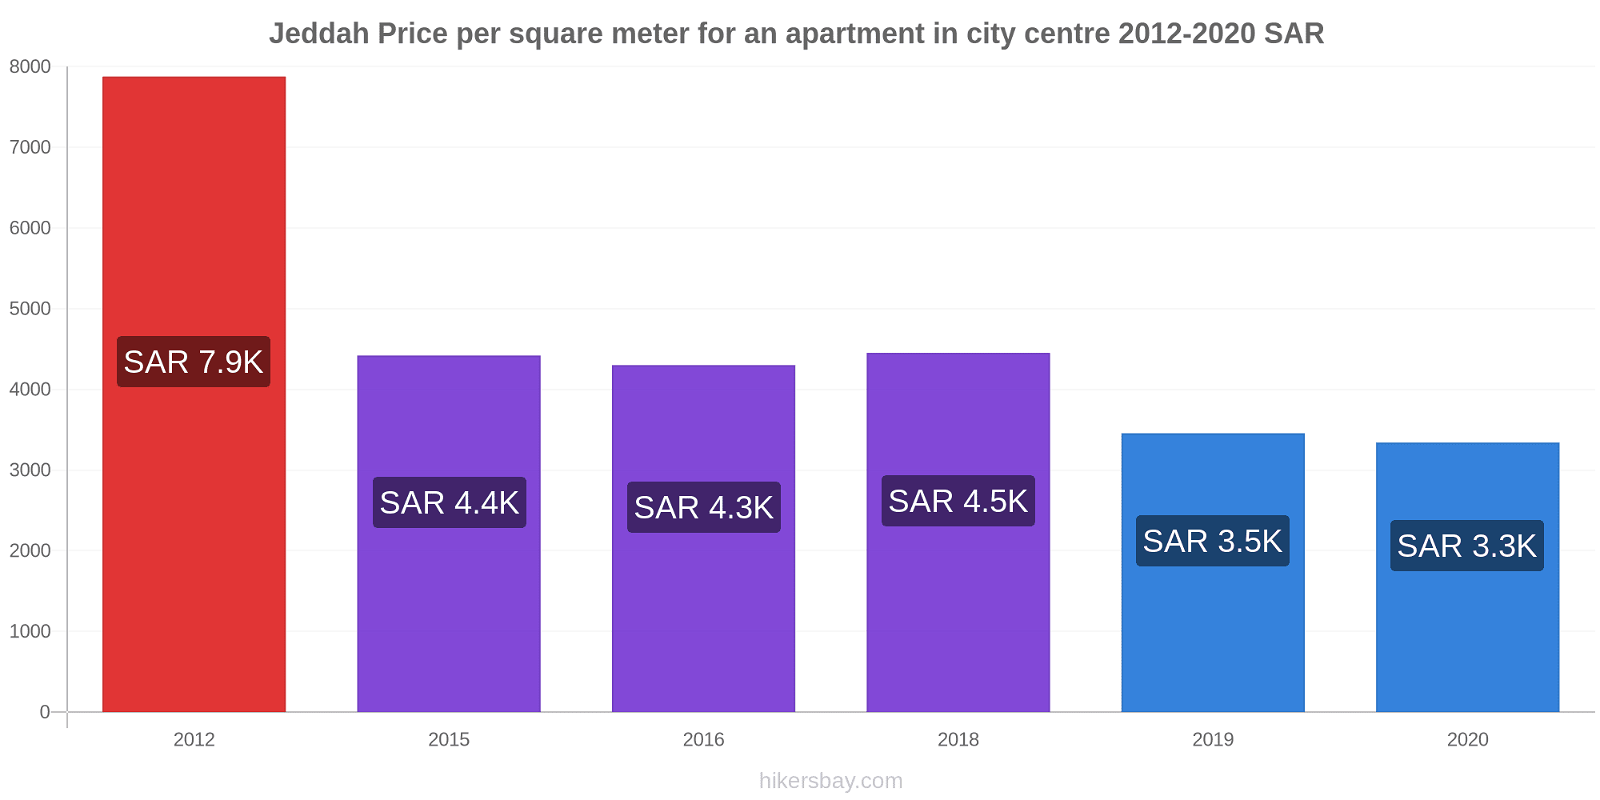 Jeddah price changes Price per square meter for an apartment in city centre hikersbay.com